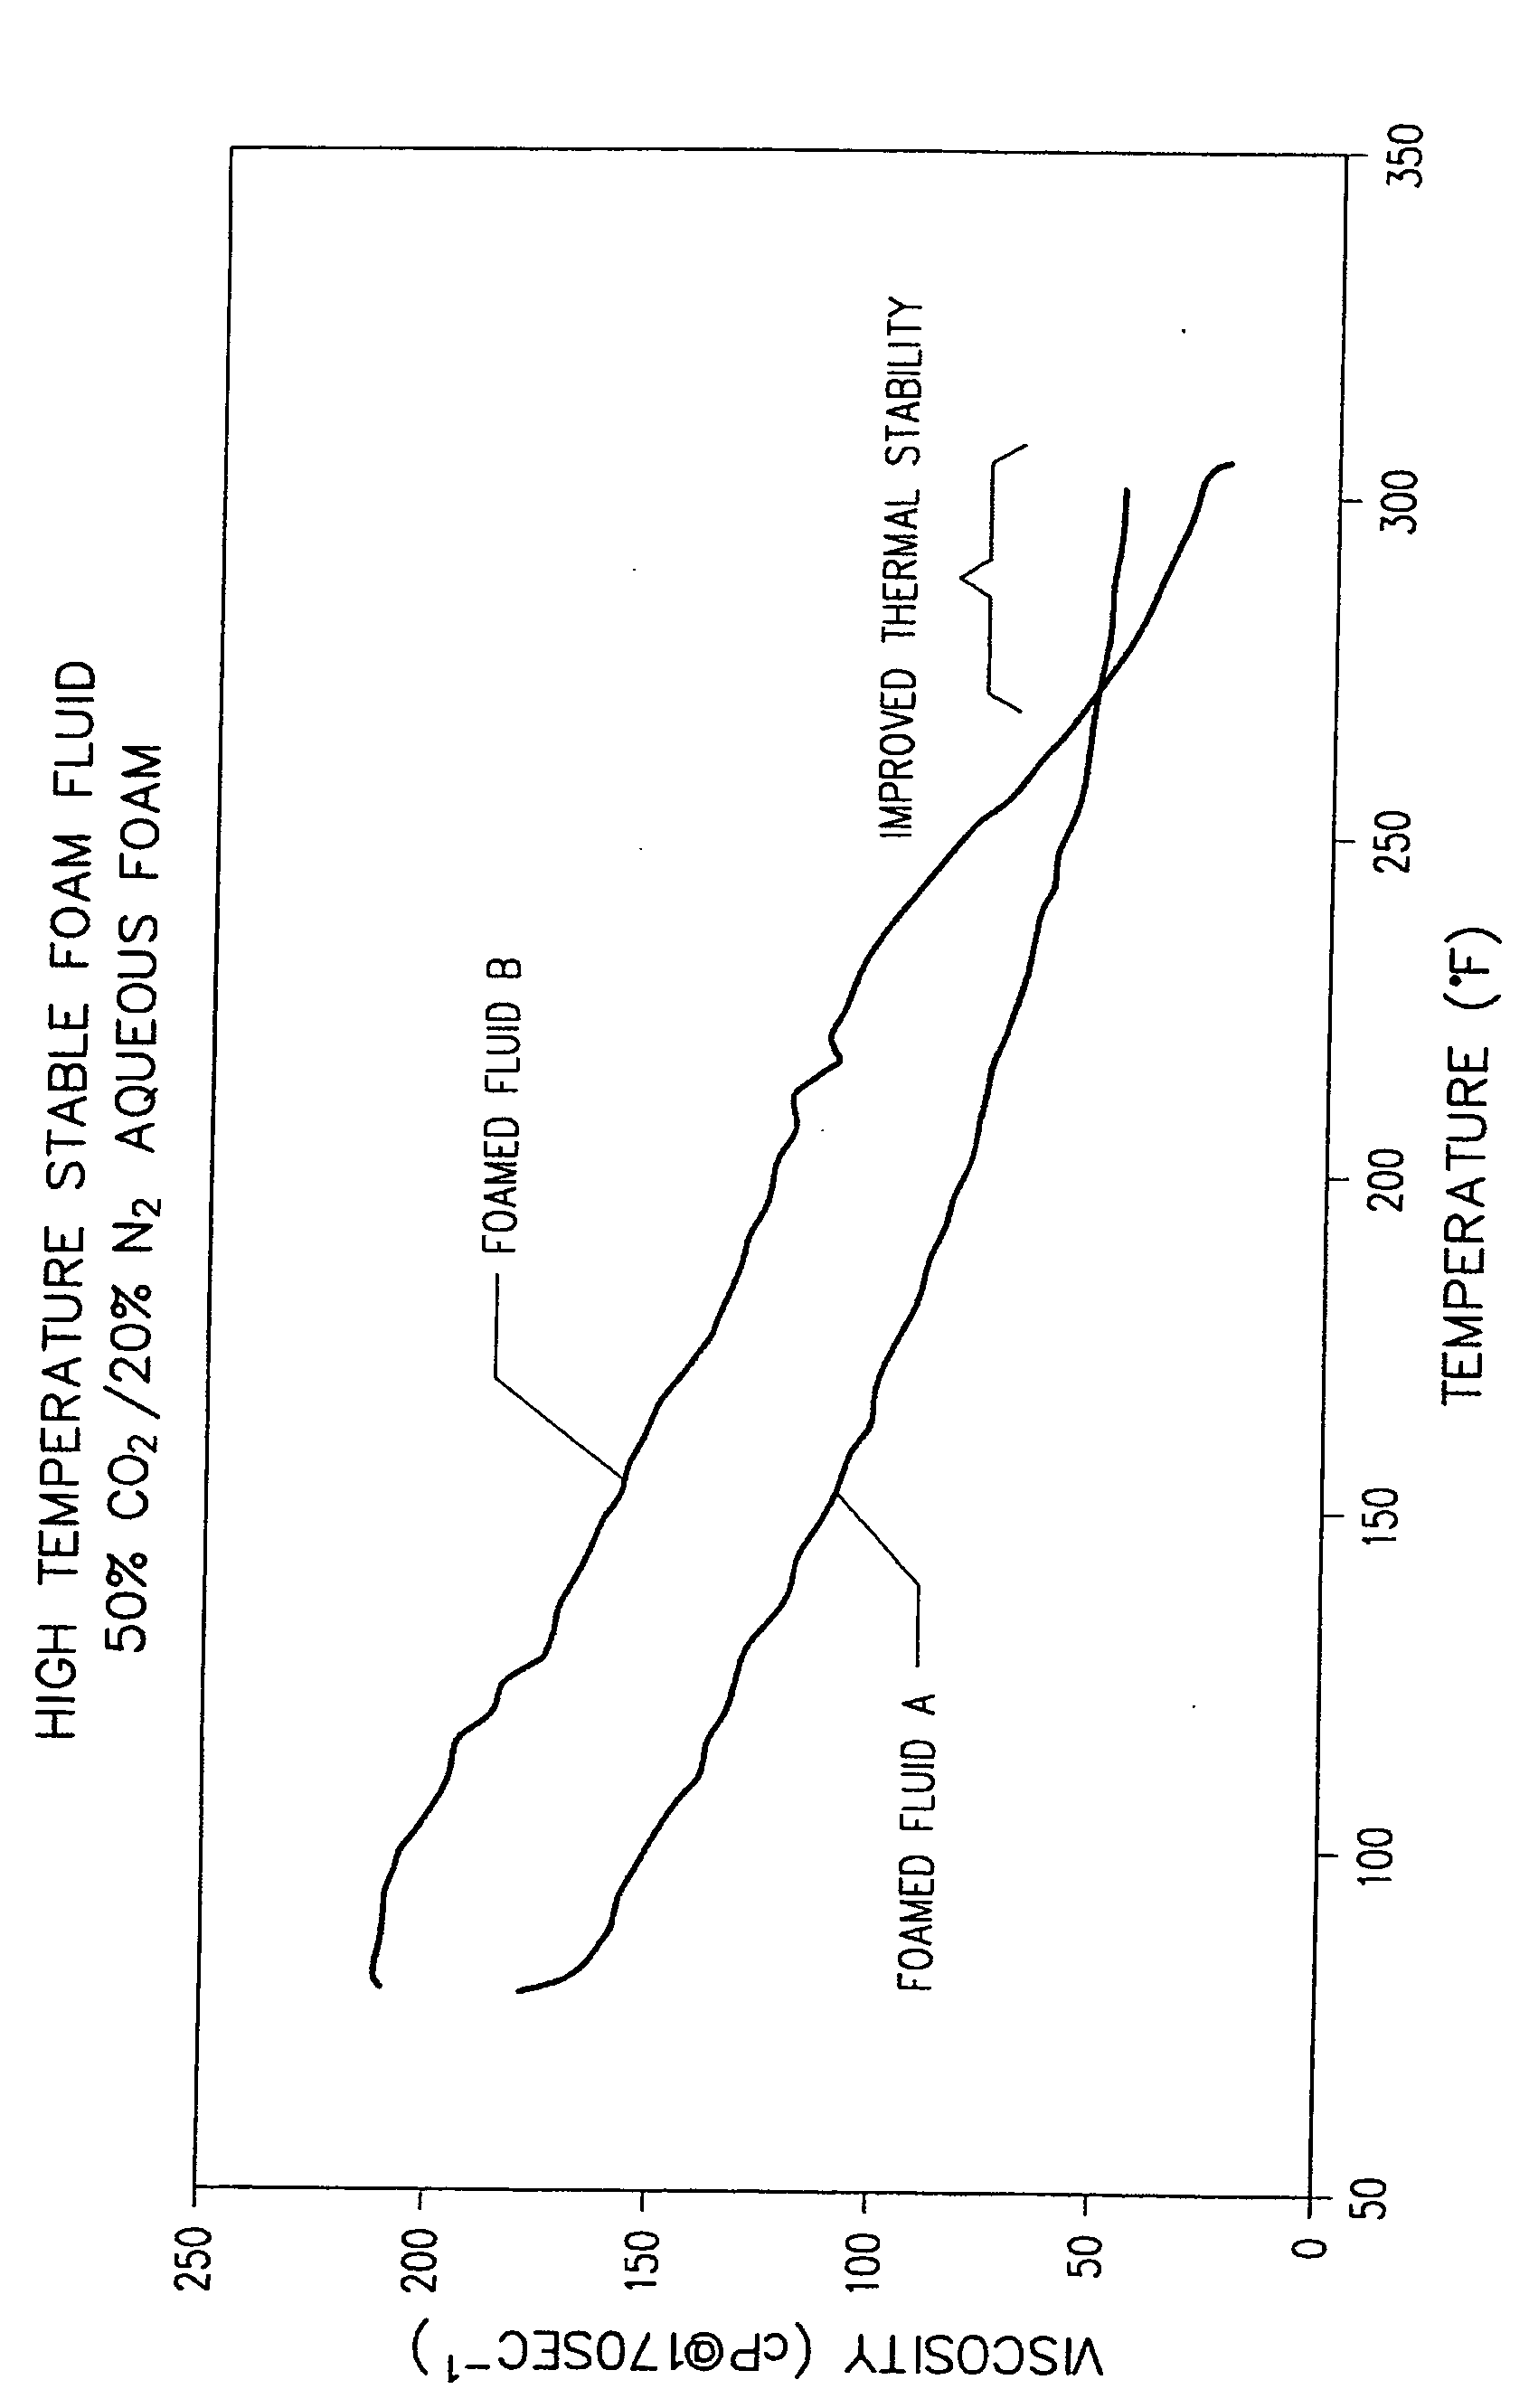 Methods of fracturing high temperature subterranean zones and foamed fracturing fluids therefor